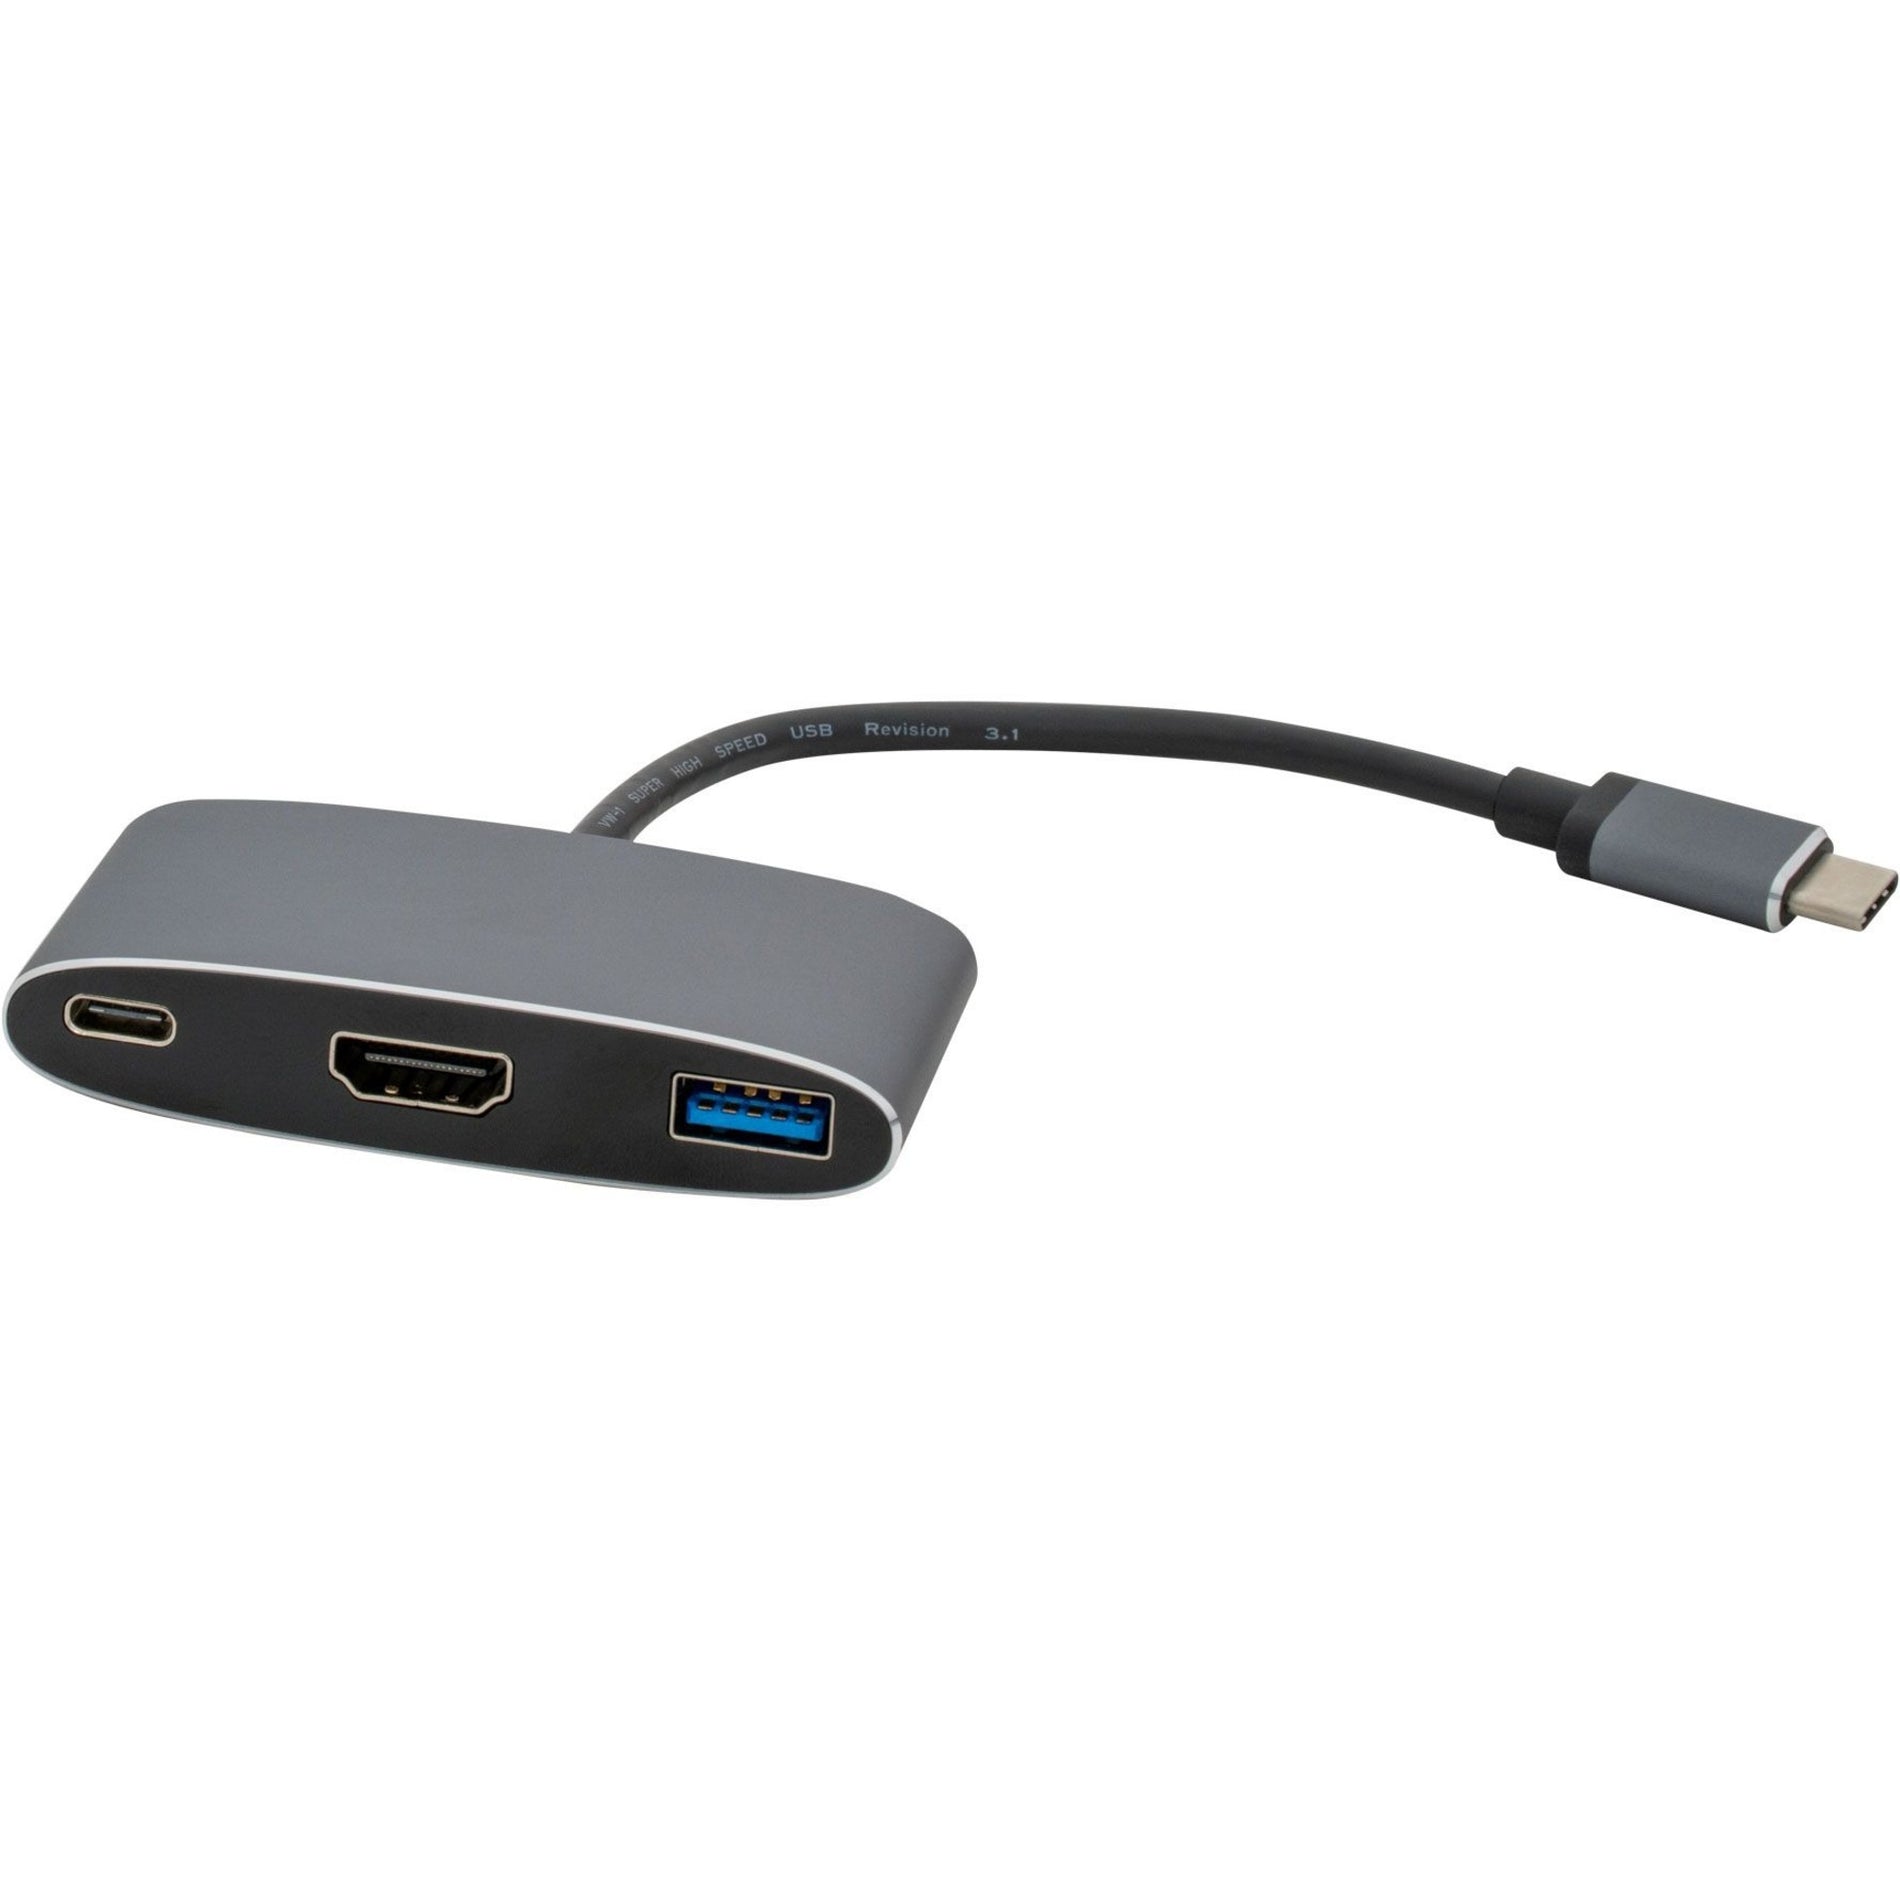 VisionTek 901356 USB-C to HDMI, USB & USB-C with Power Delivery Adapter, Plug and Play, 3840 x 2160 Resolution Supported